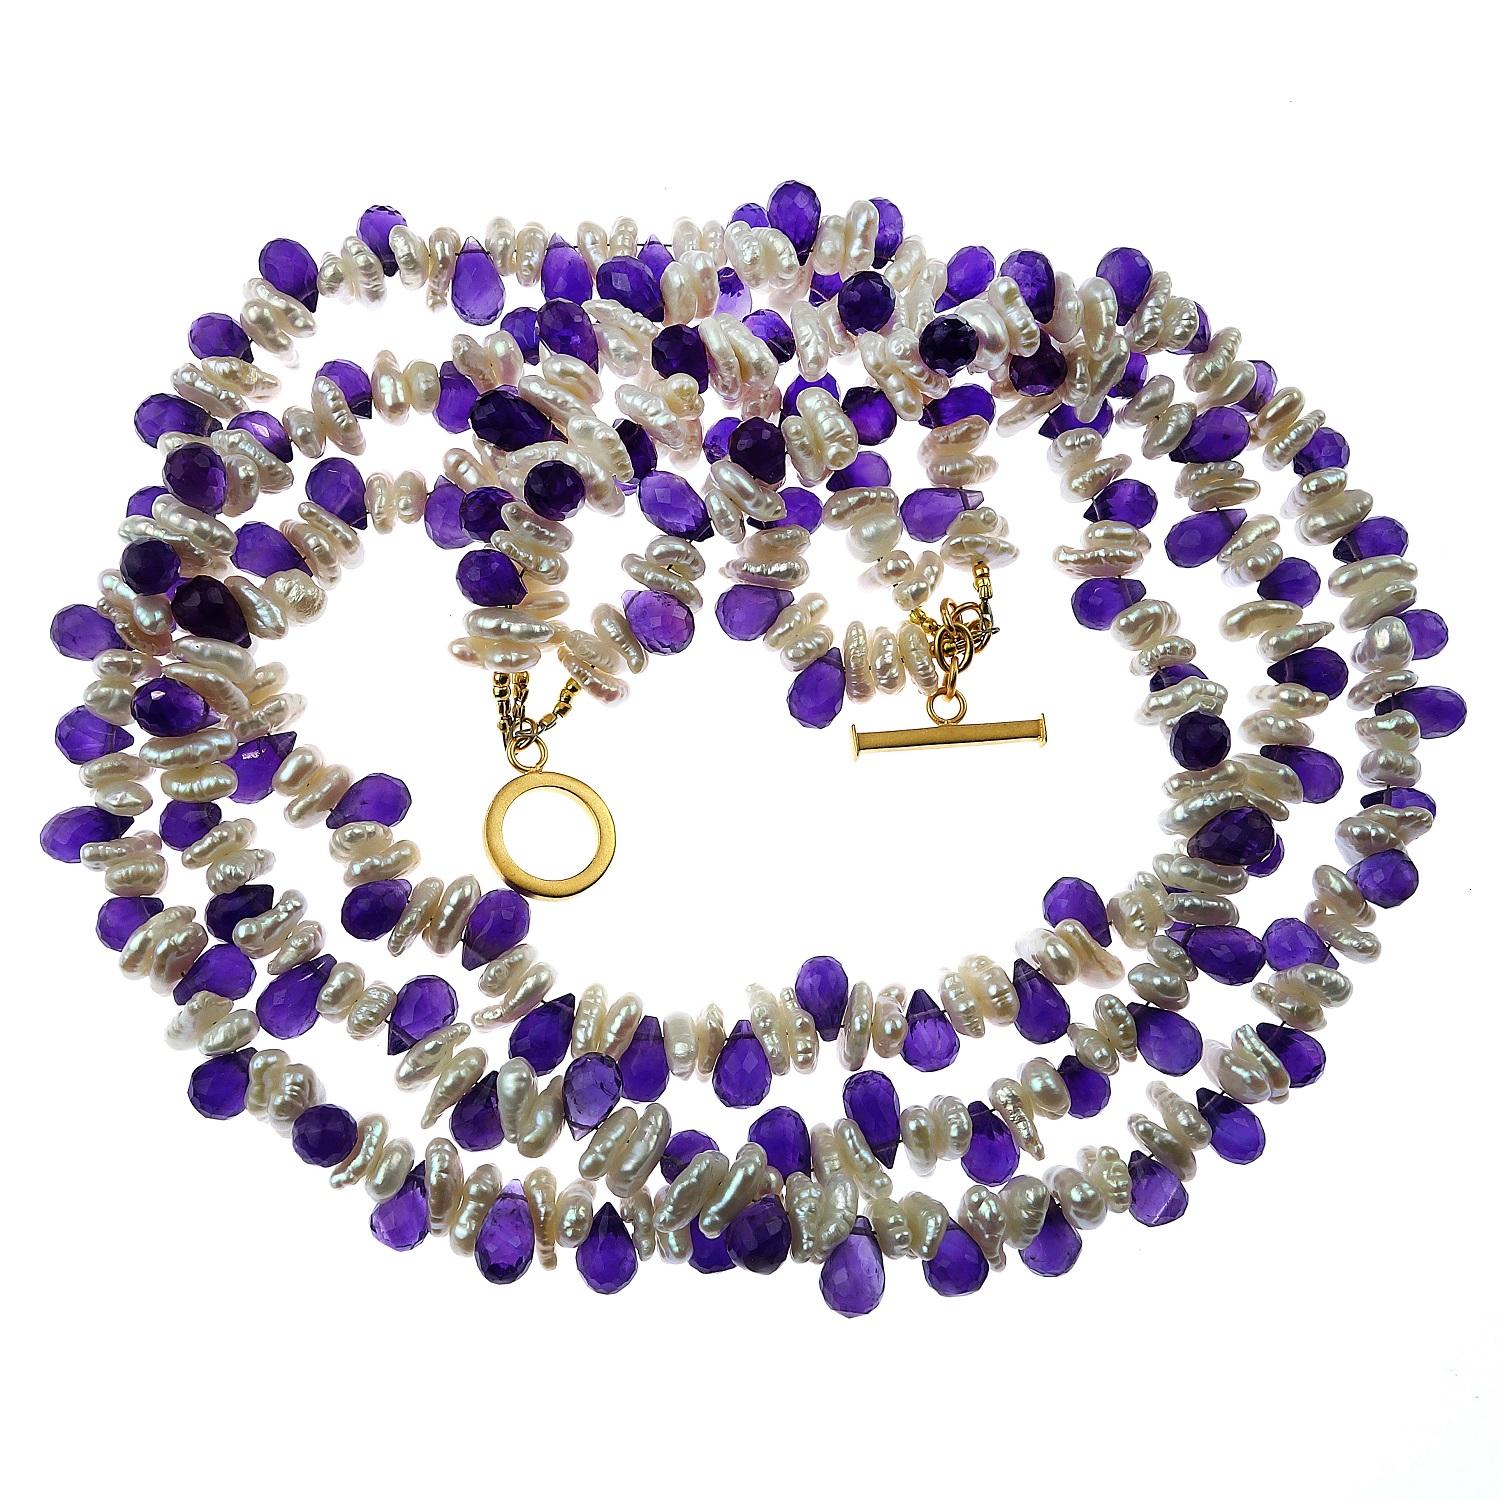 Custom made sparkling Amethyst Briolettes alternating with lustrous White Keshi Pearls necklace. These three strands will sit loosely on top of each other or can be twisted to create more of a choker. The total length of the necklace is 17.5 inches